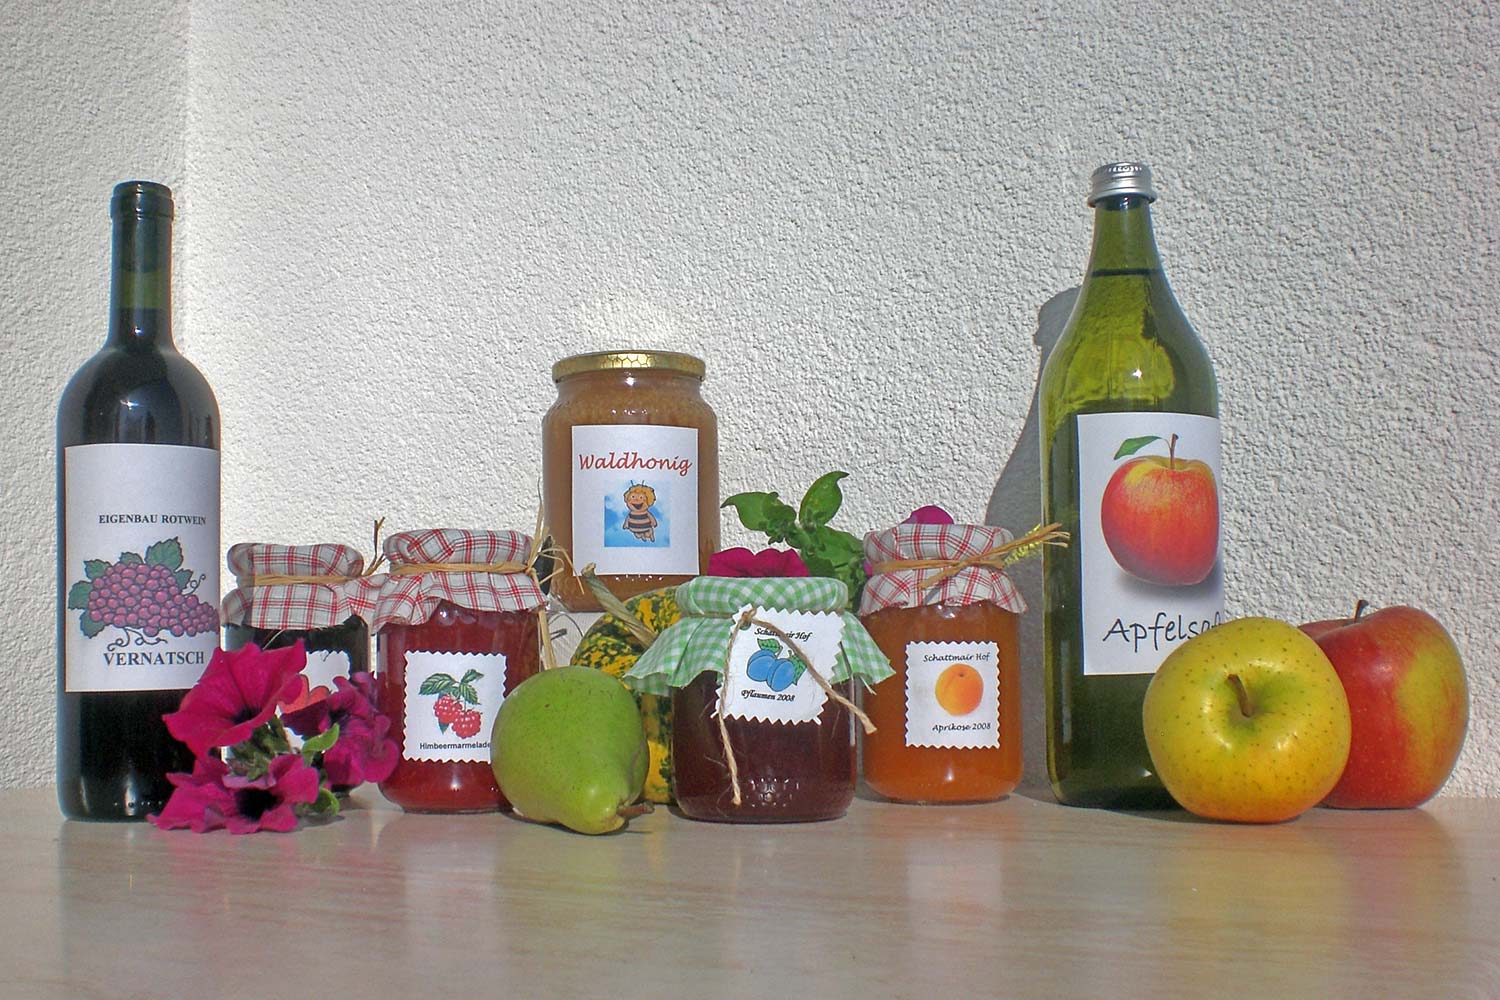 Products from South Tyrolean farmers